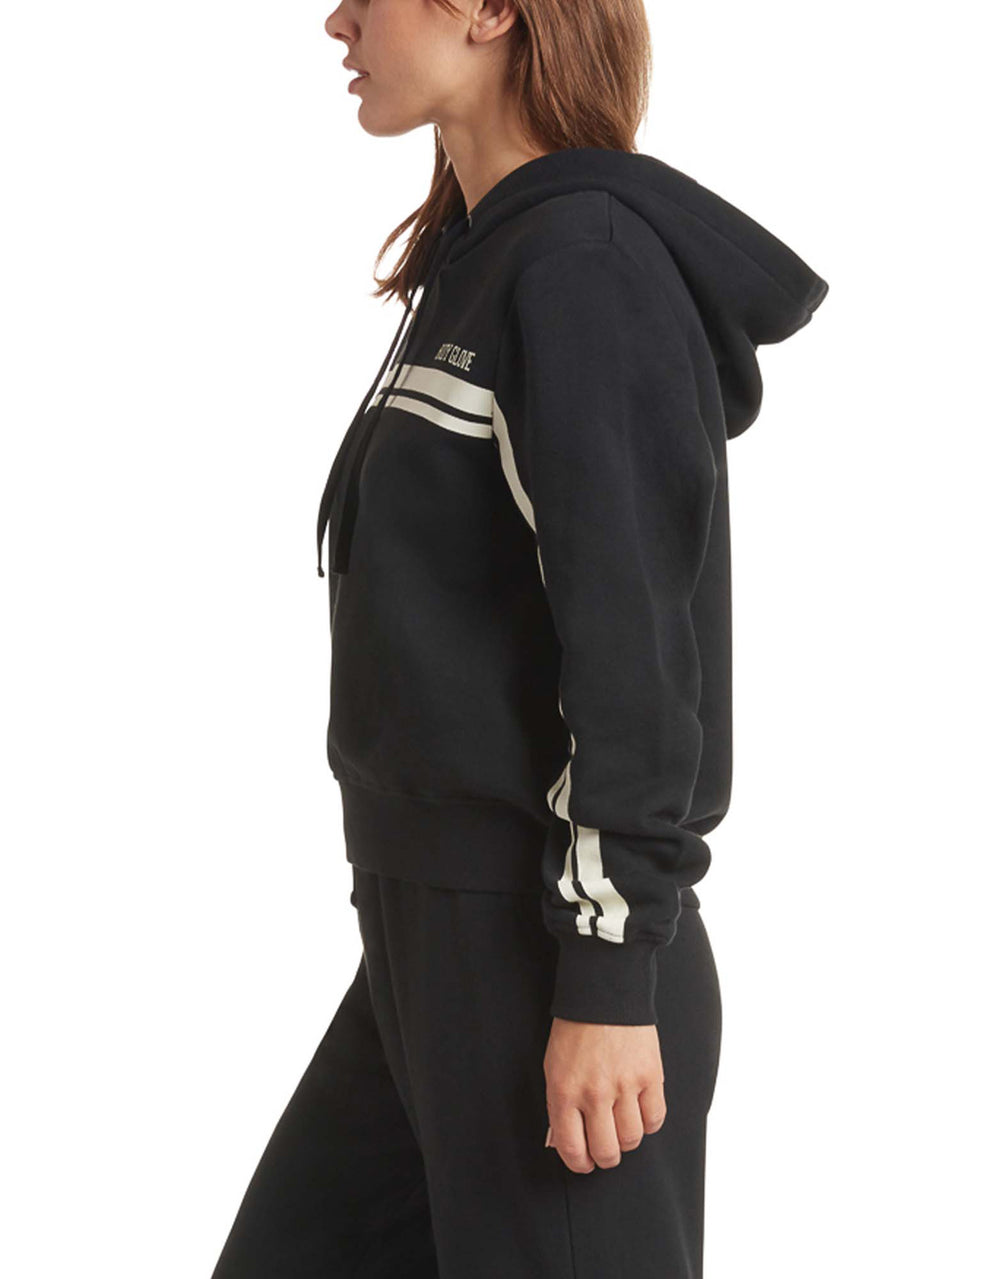 Come On Over Cropped Hoodie - Black